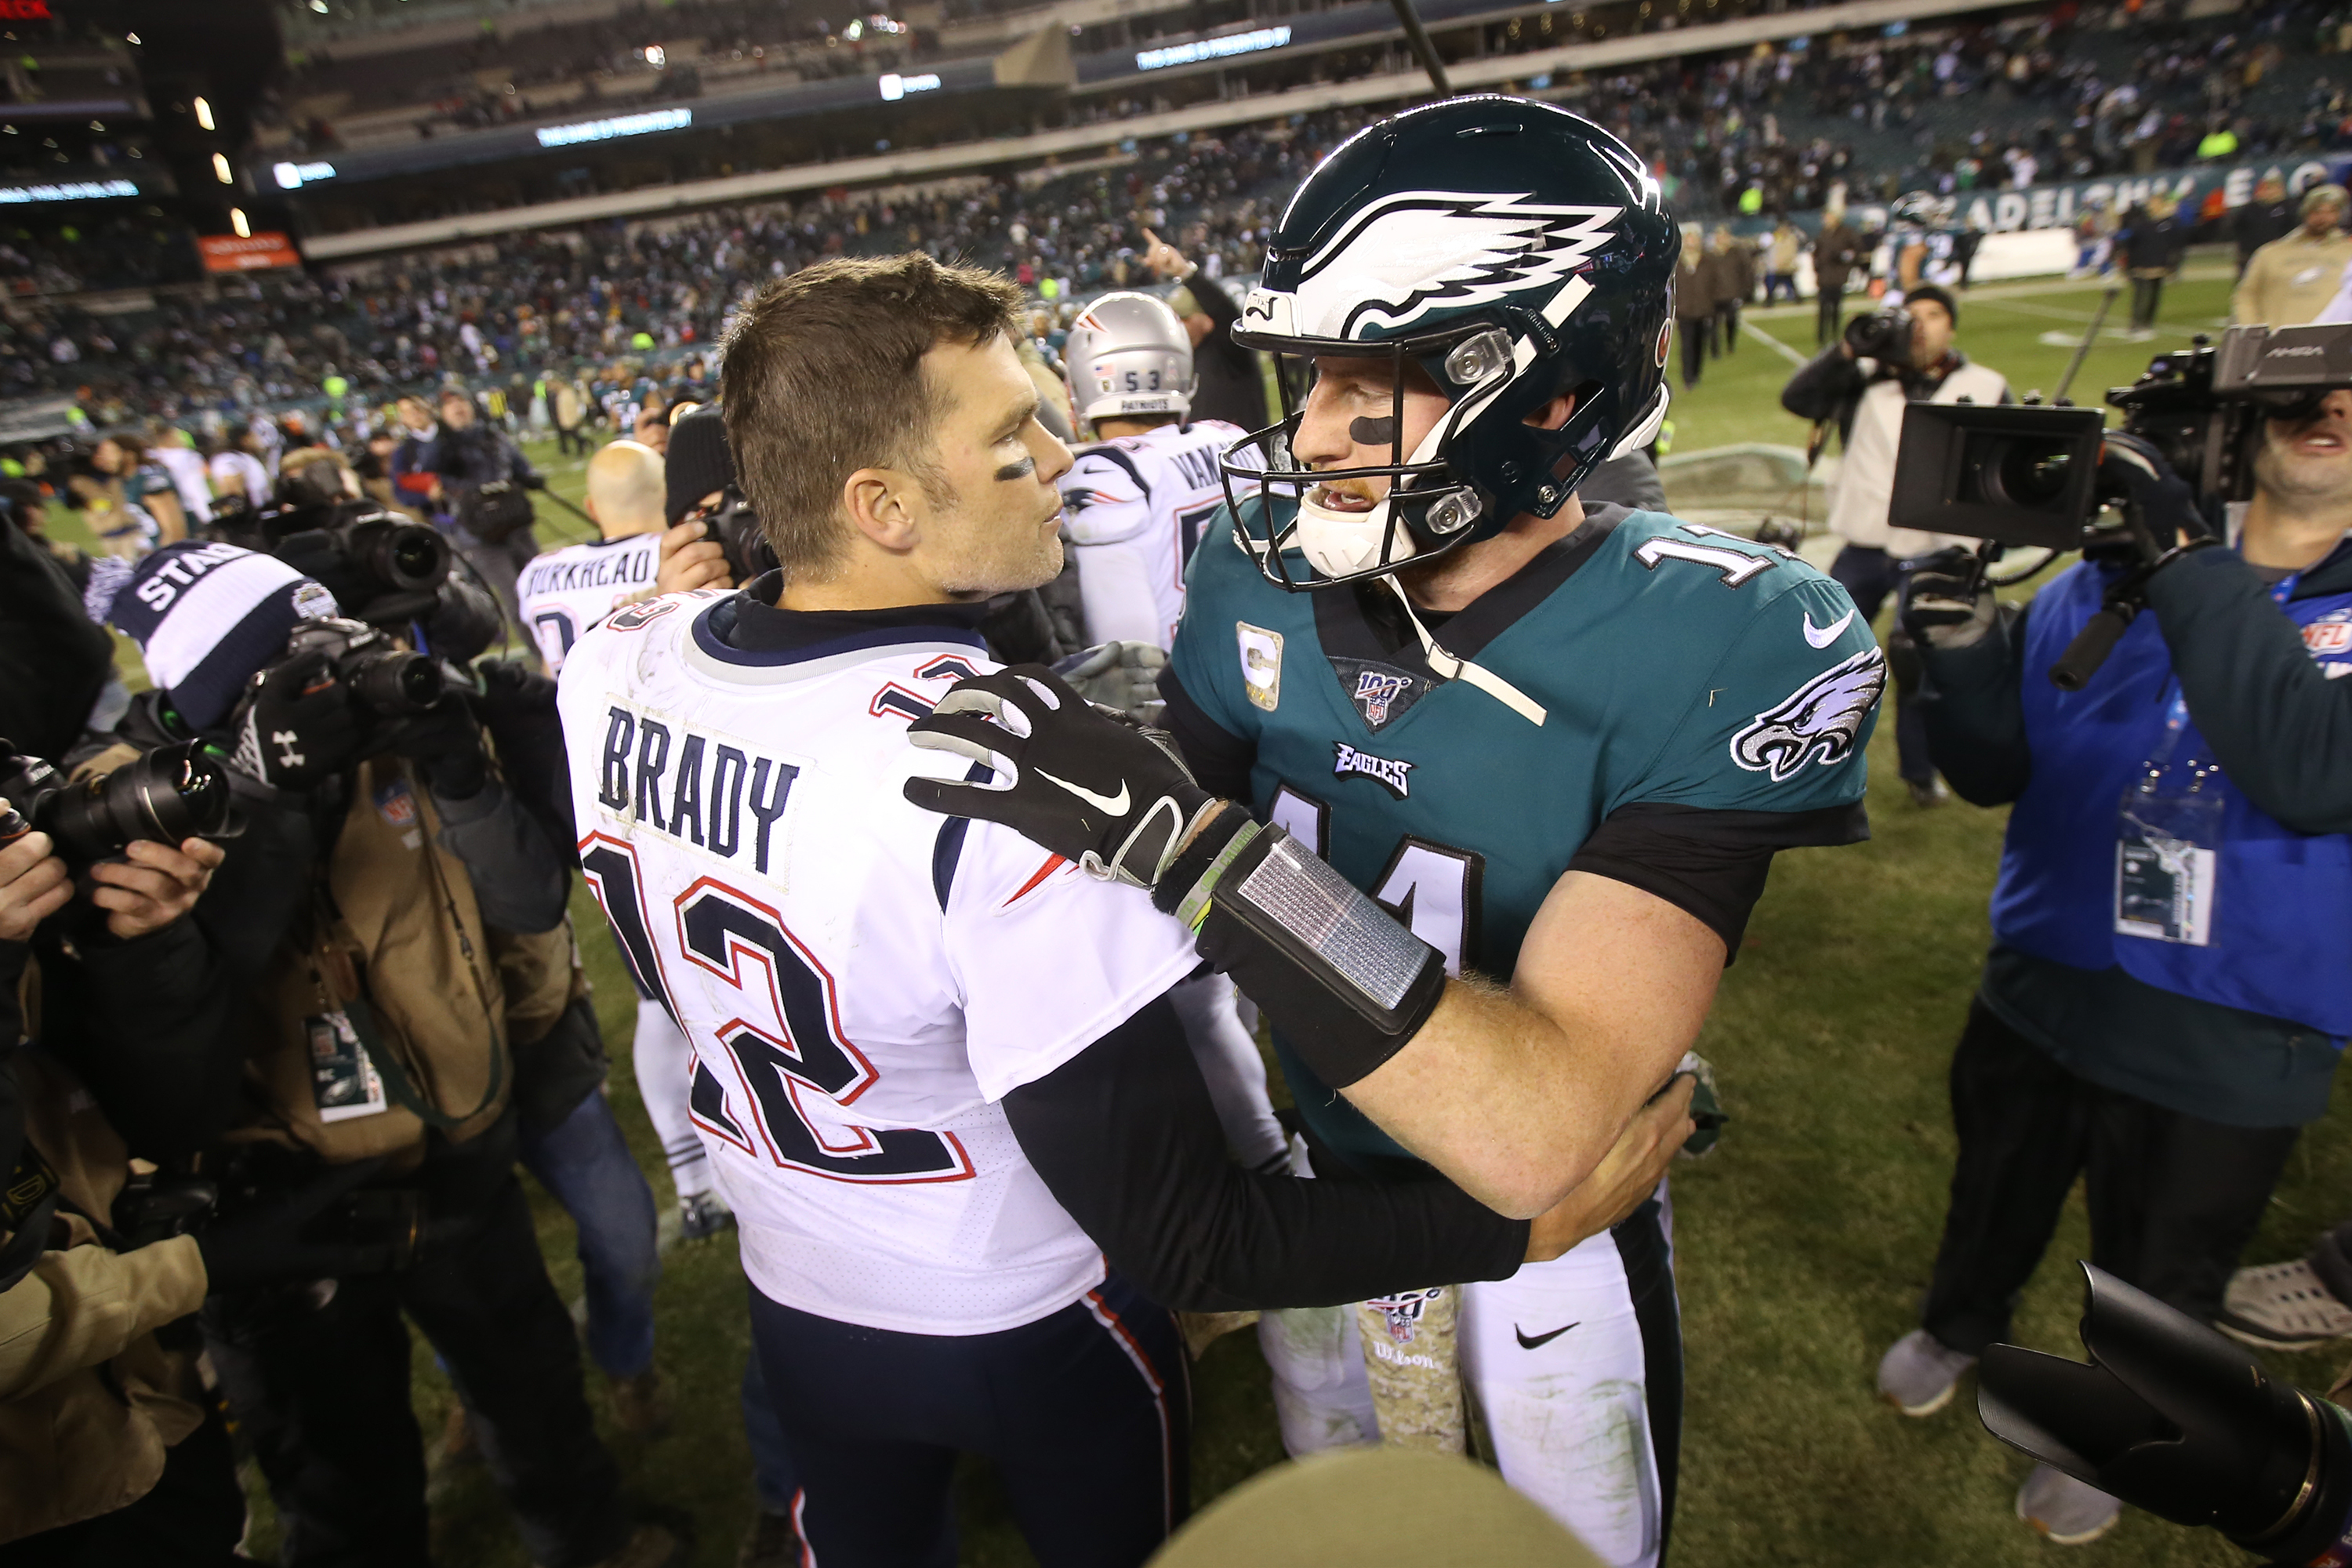 Brady Or Dallas? Eagles Will Have To Wait: Philly Sports Chatter